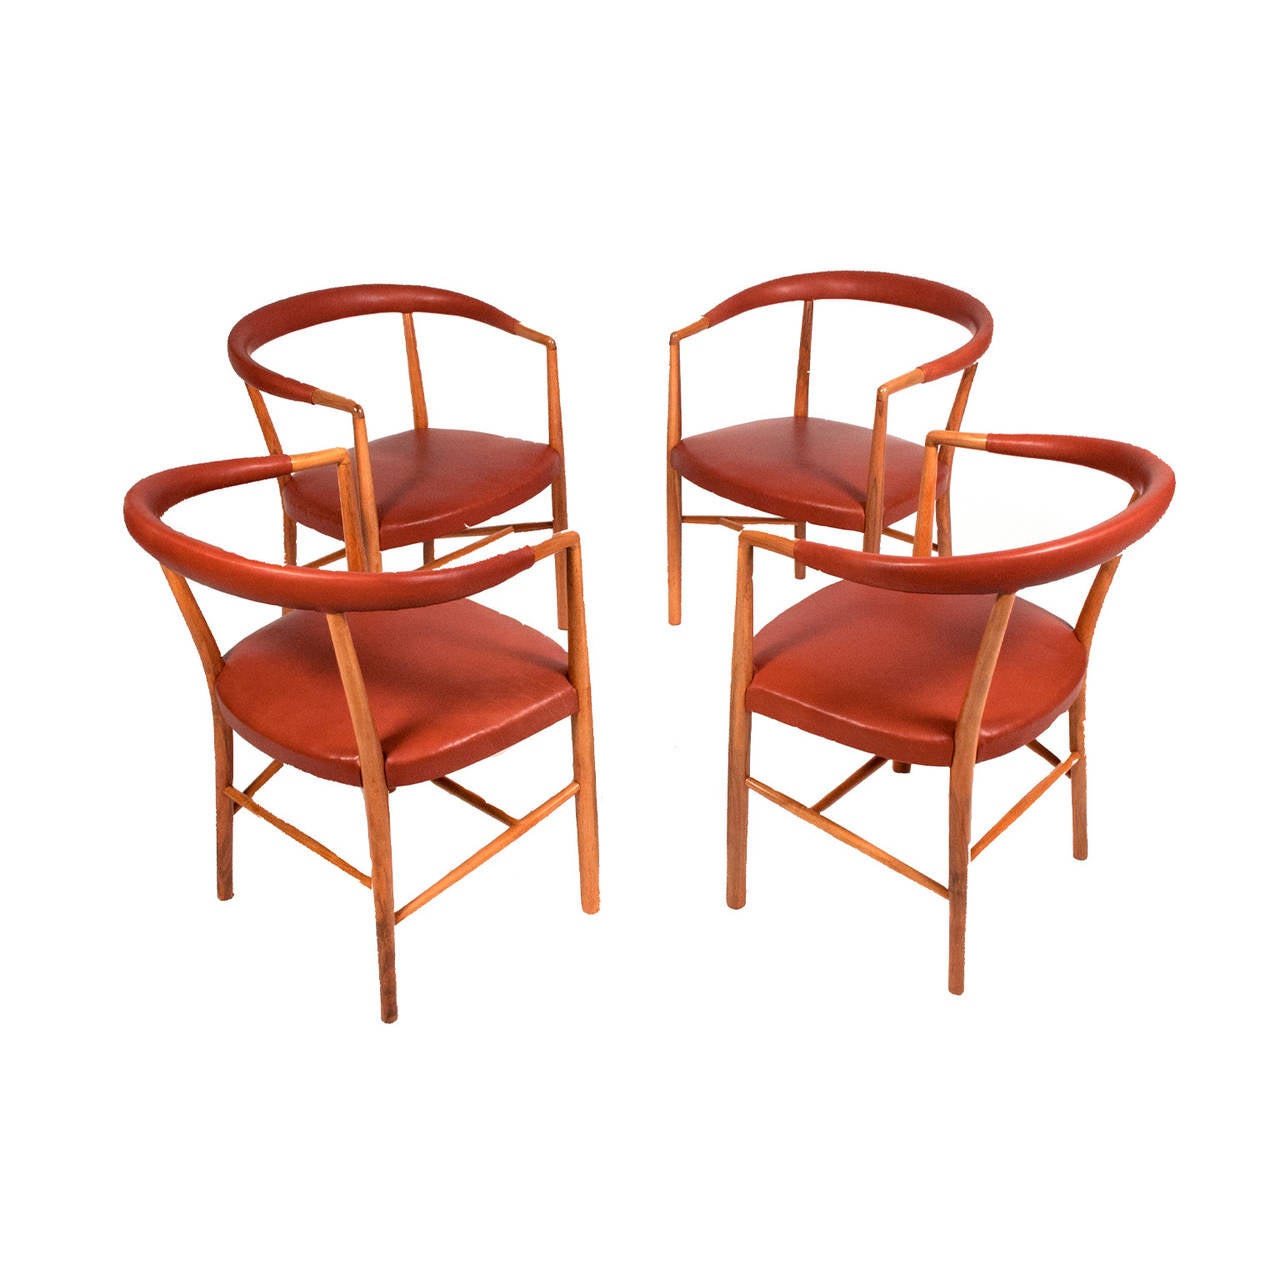 Hard to find set of four UN chairs originally design in 1948 for the UN I, New York. Those examples are walnut and new leather upholstery. Retains label, Jacob Kjaer model Handvaerk, Udfort, 1954.